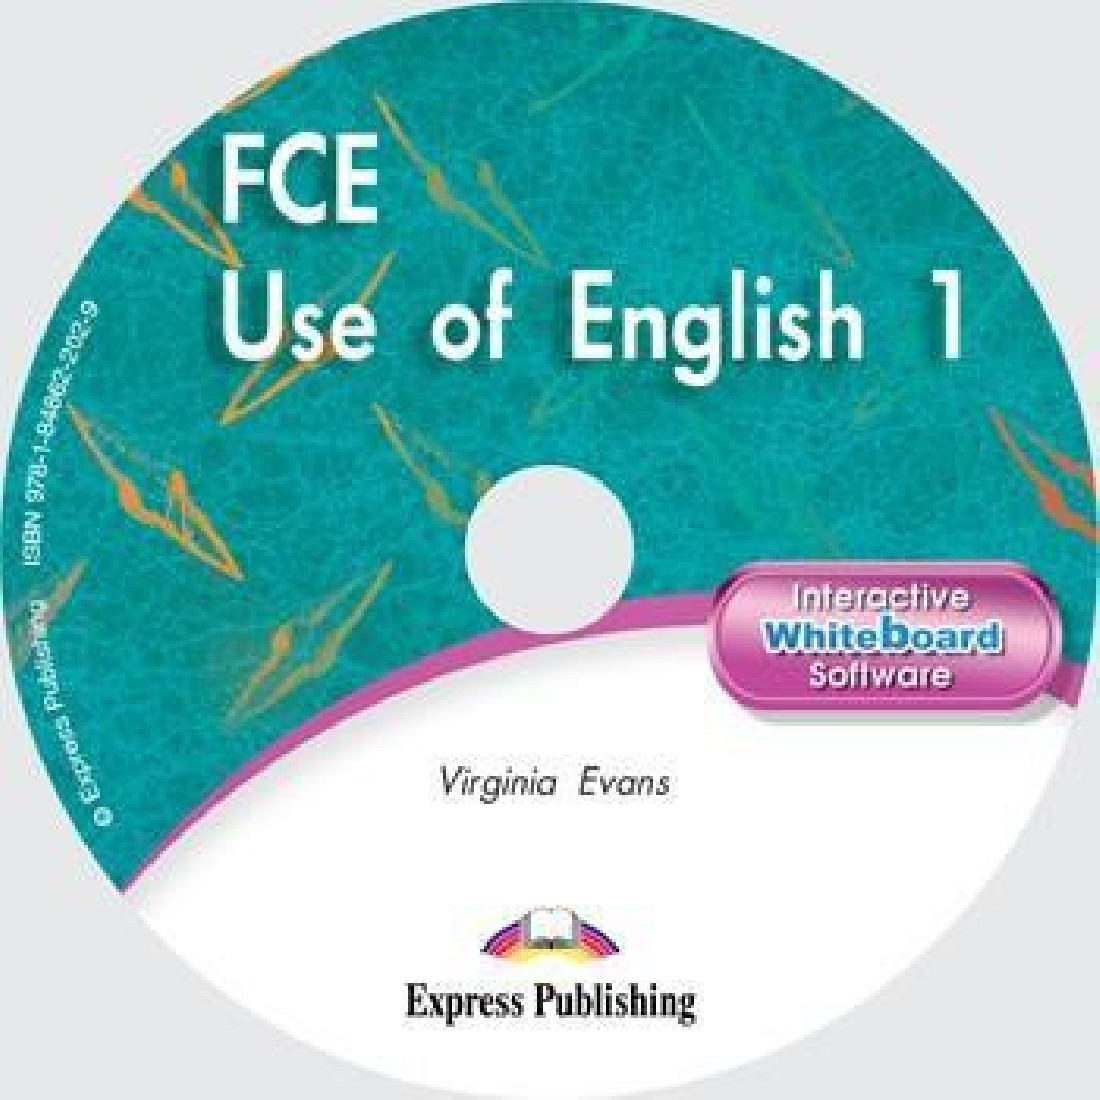 FCE USE OF ENGLISH 1 INTERACTIVE WHITEBOARD SOFTWARE